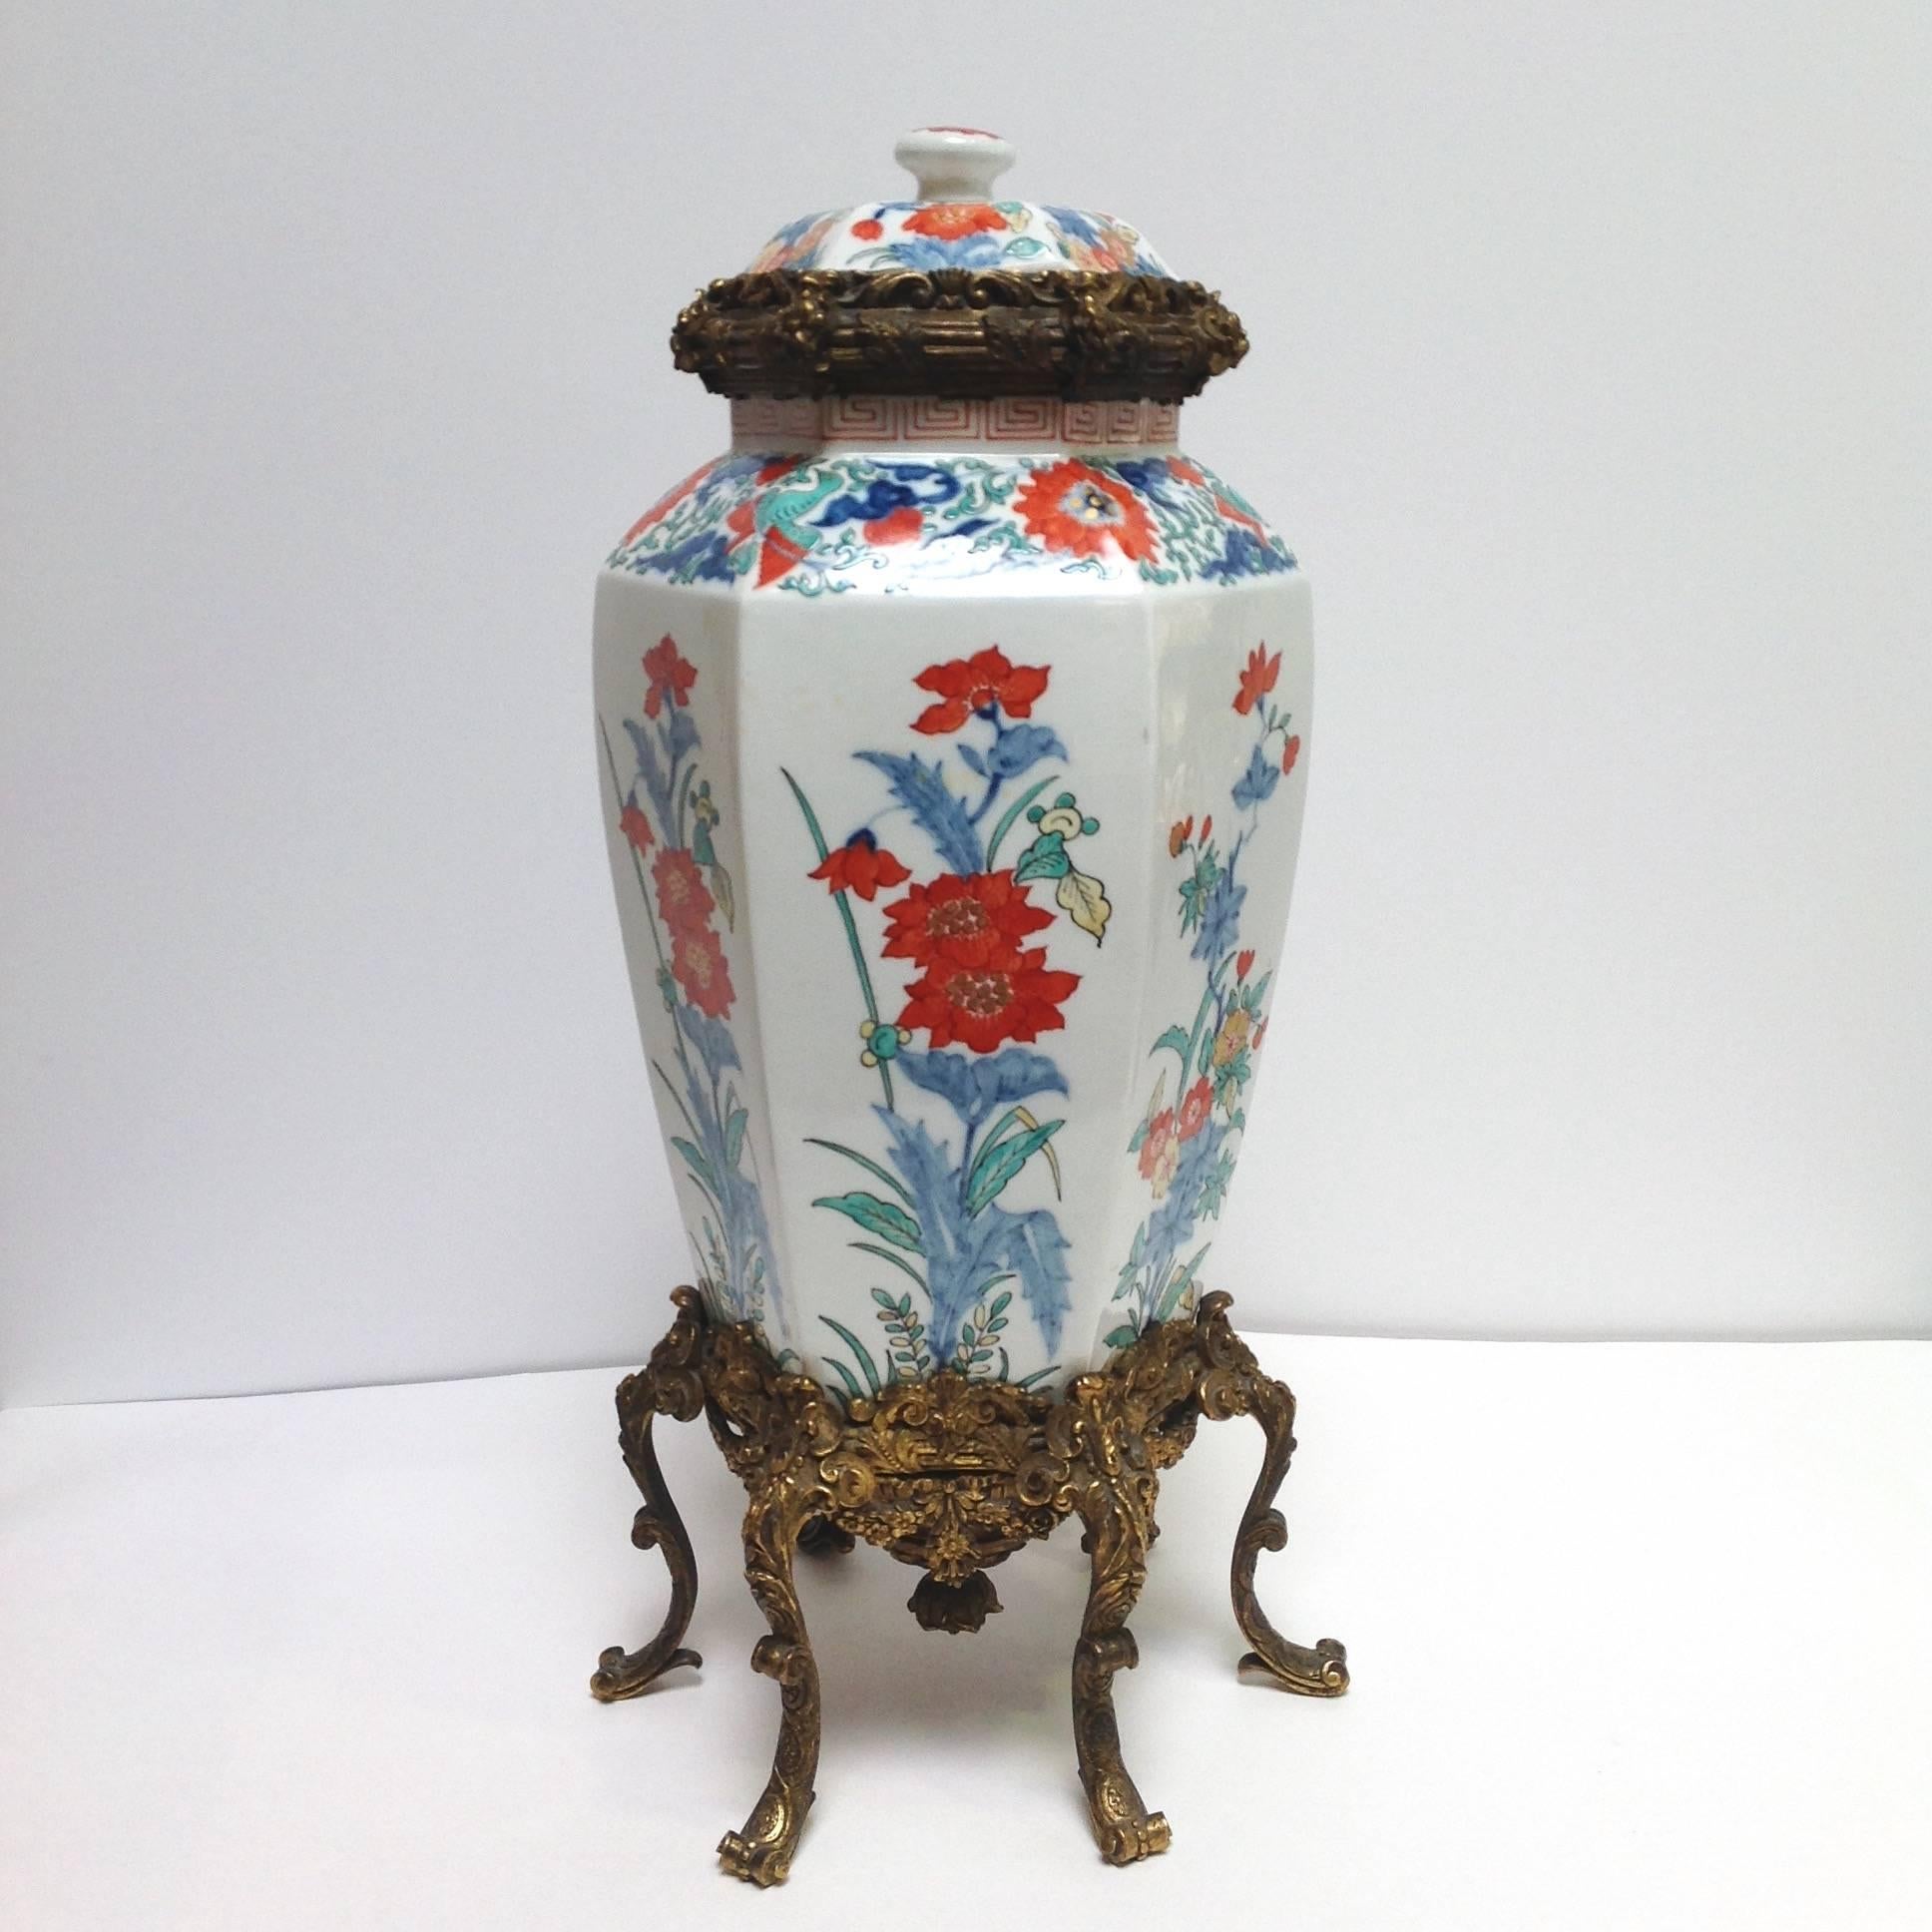 Sampson covered porcelain vase with ornate French gilt bronze mounts. The vase has an Asian inspired blue and orange floral decoration with a Greek key pattern along the top. 
Paris, France.  Circa early 19th century.